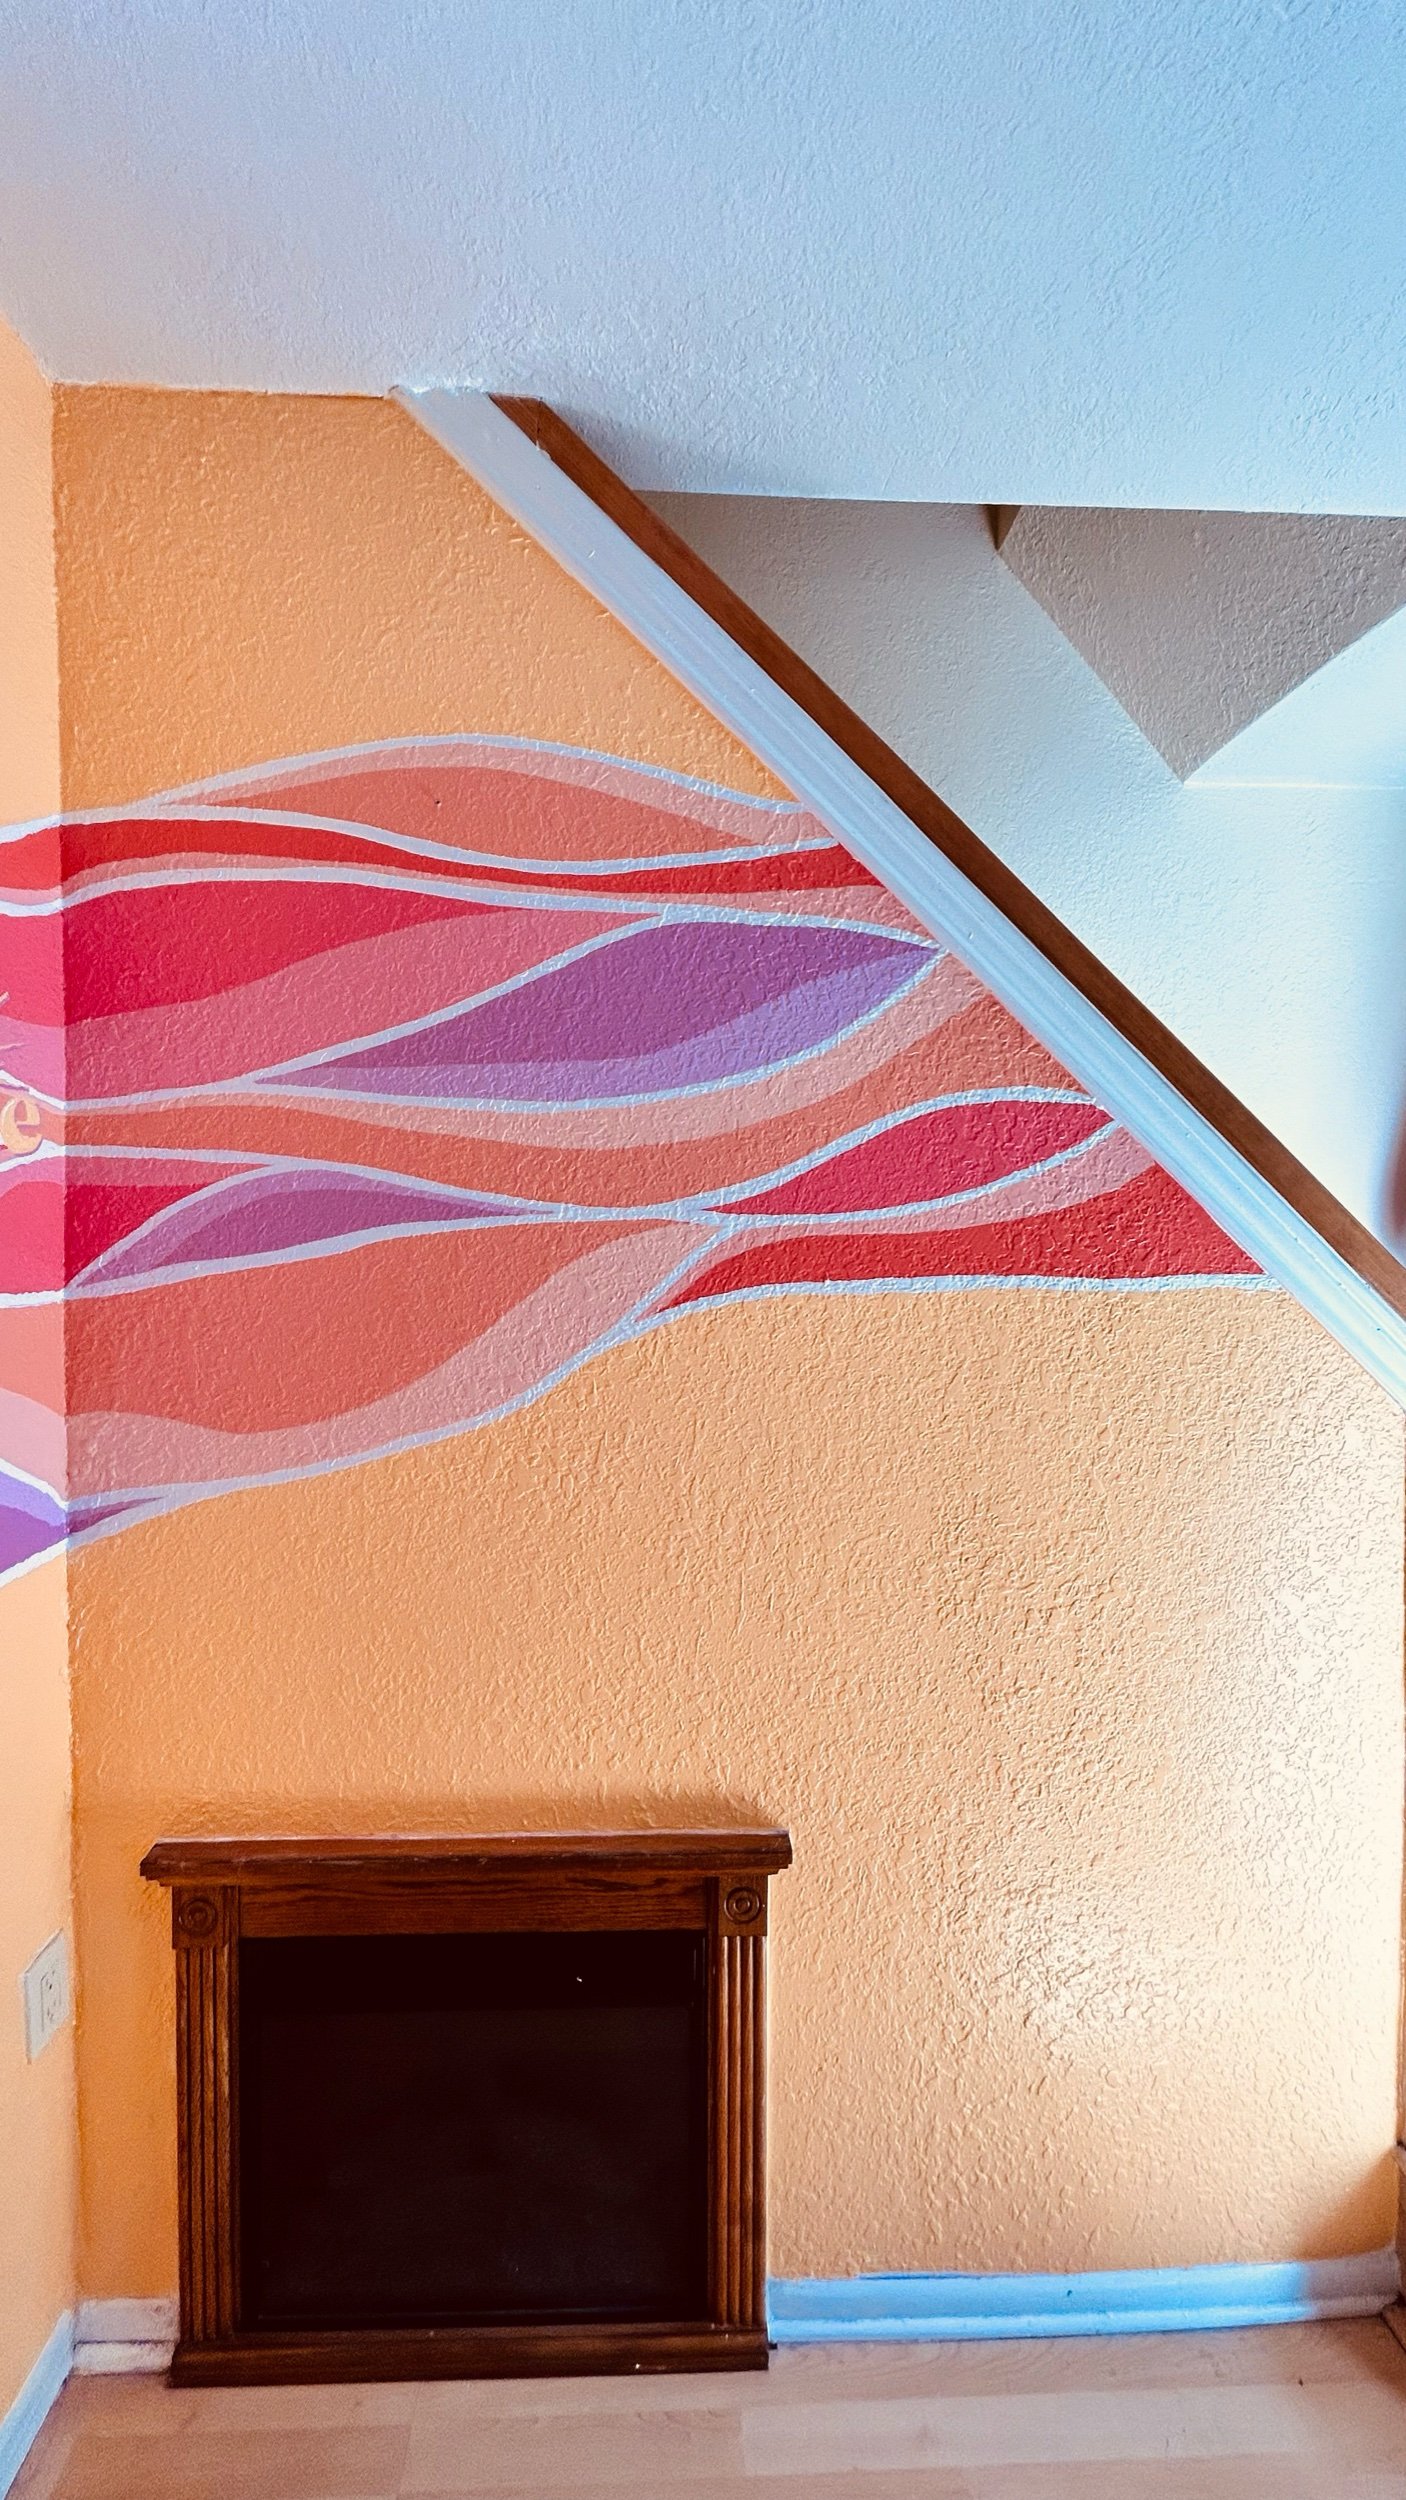 Mango tango with abstract waves mural